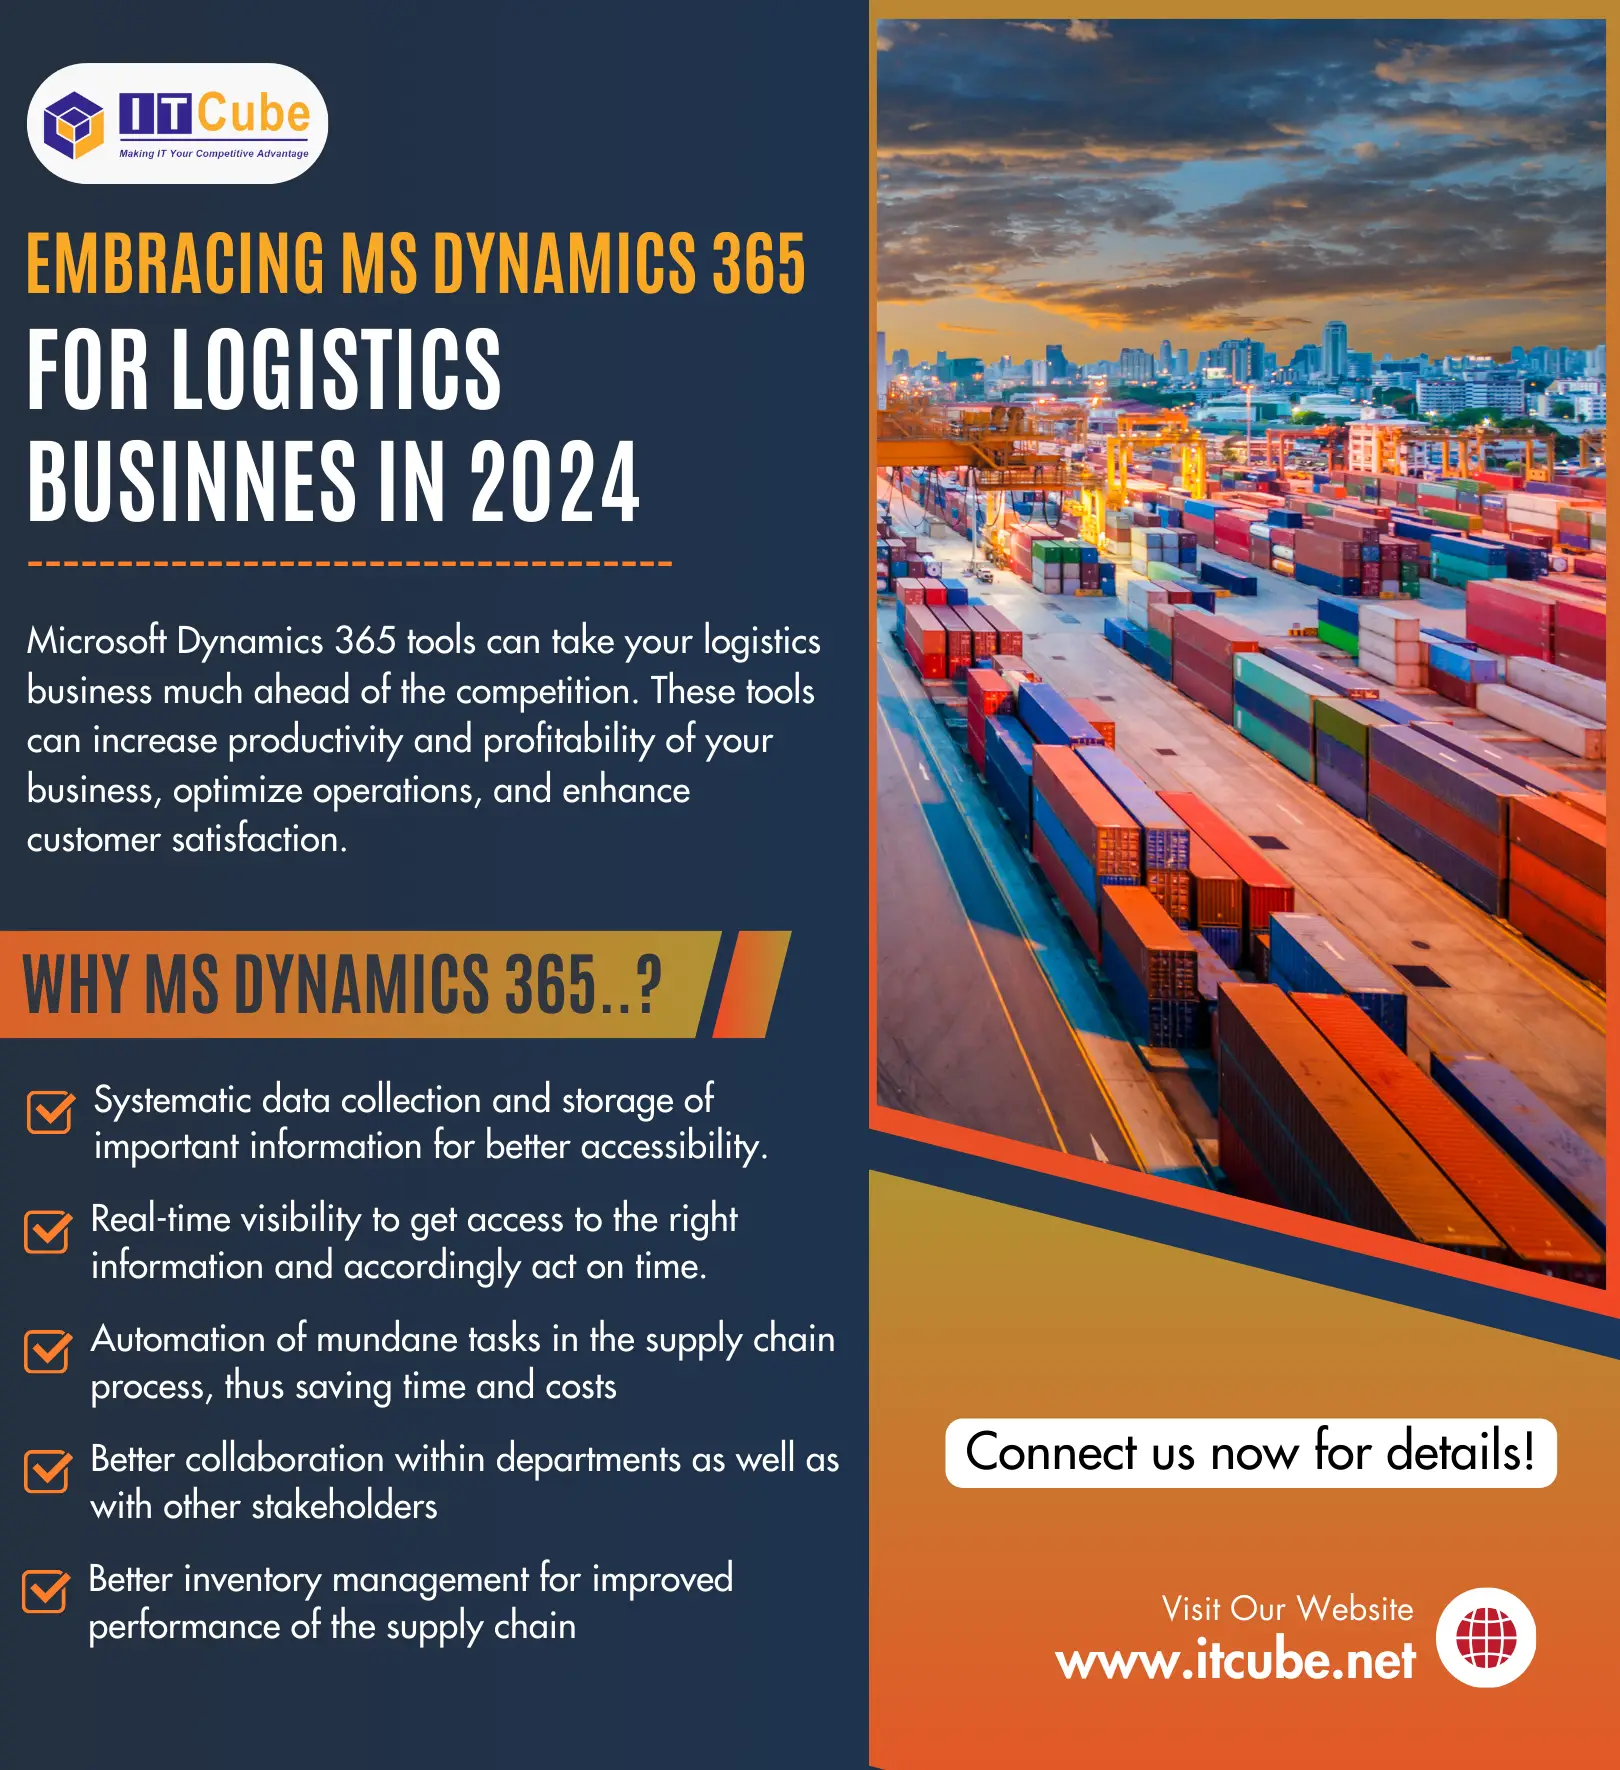 why-logistics-business-needs-ms-dynamics-365 Image